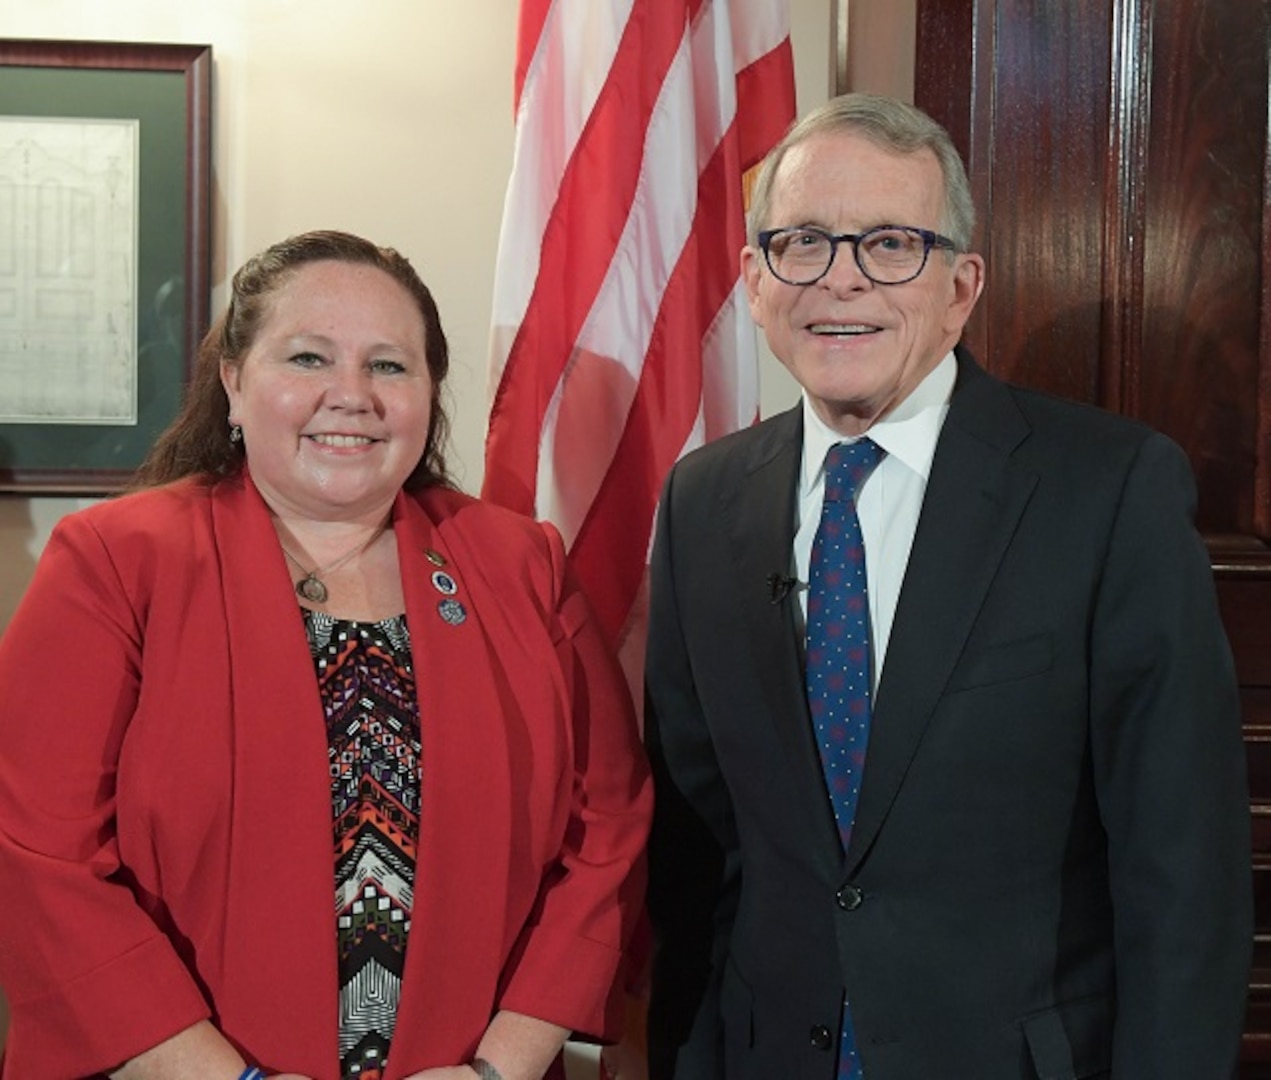 DFAS associate Angela Beltz and Ohio Gov. Mike Dewine at the Ohio's State House on December 13, 2019.